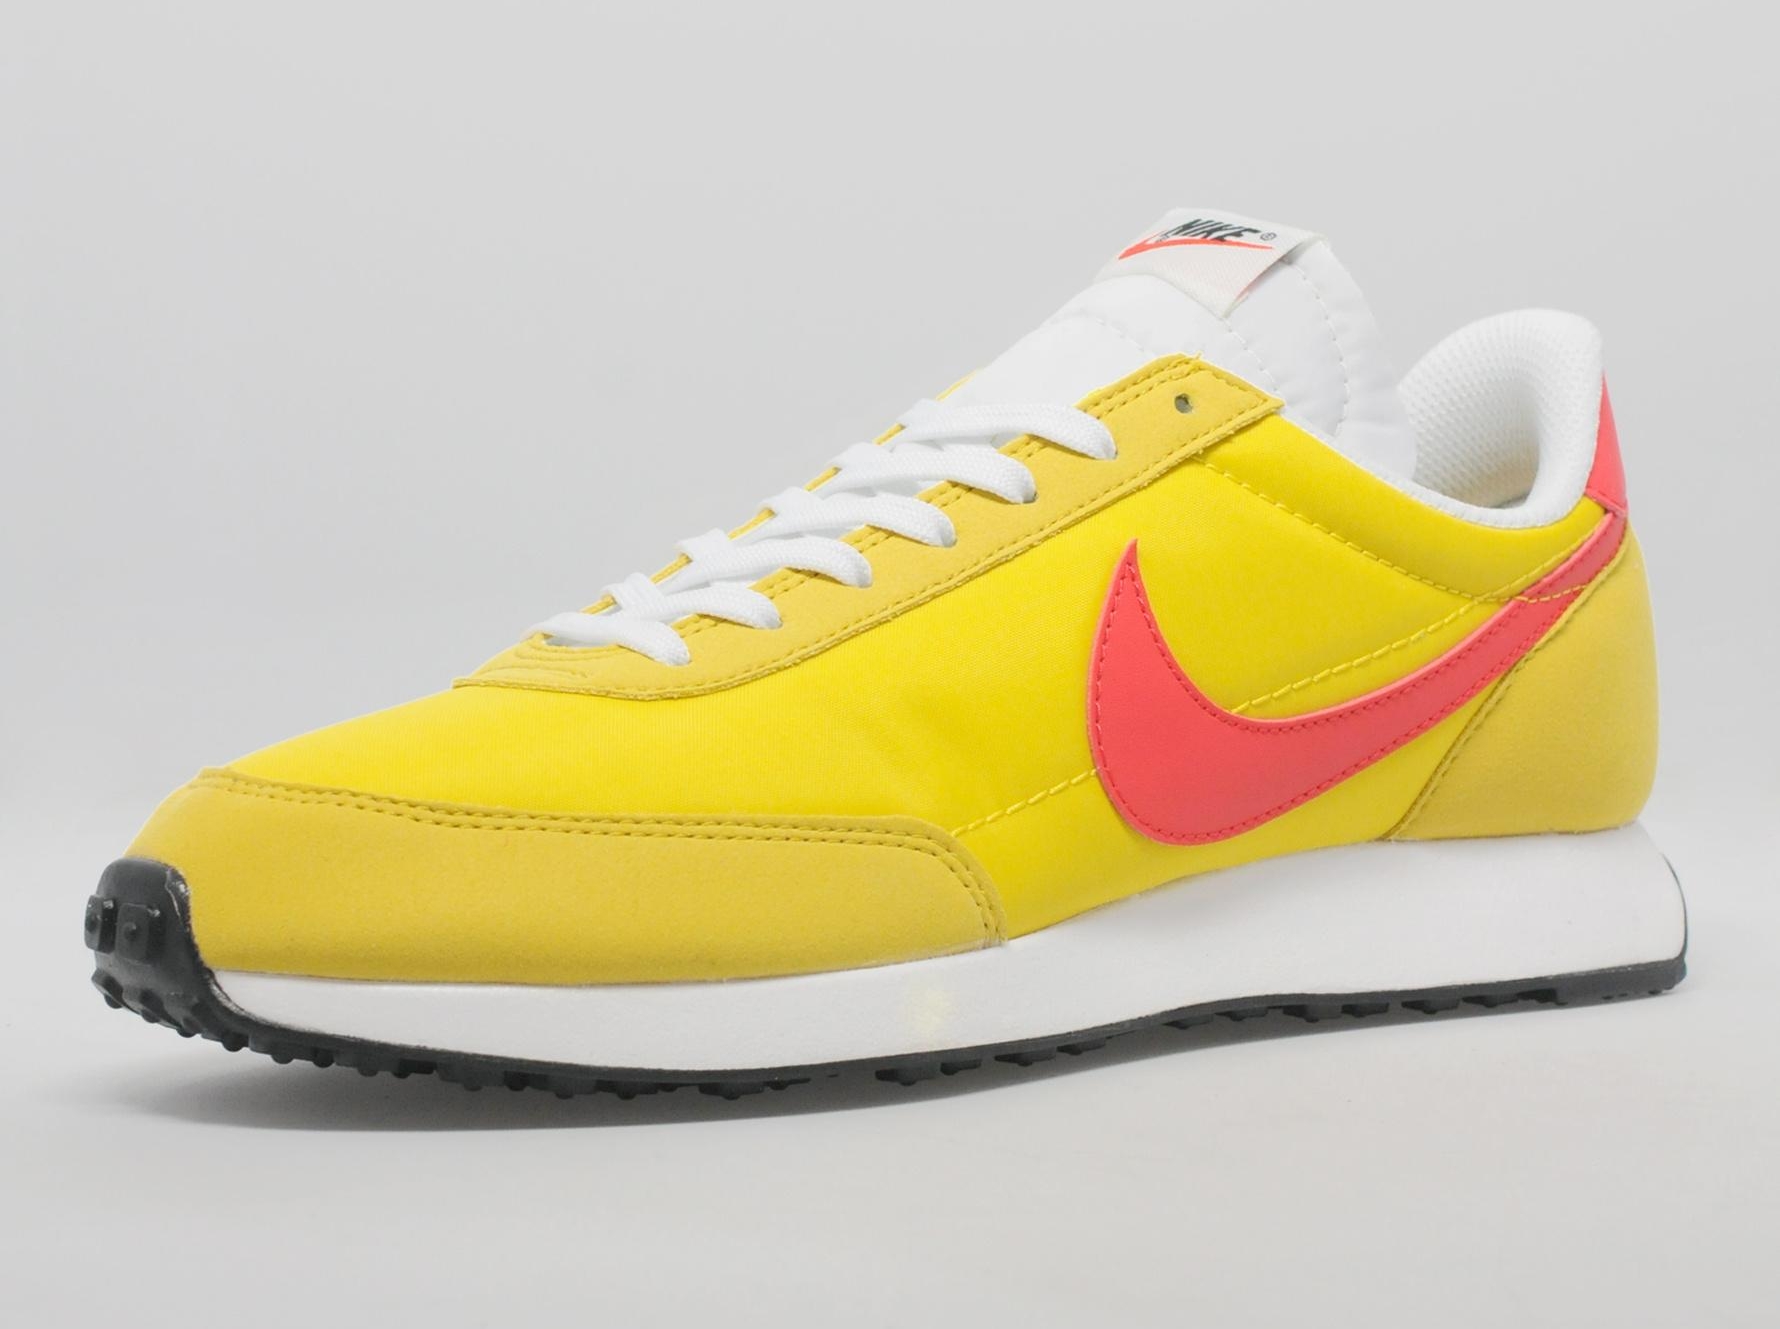 Nike Air Tailwind - Vivid Sulfur - Action Red